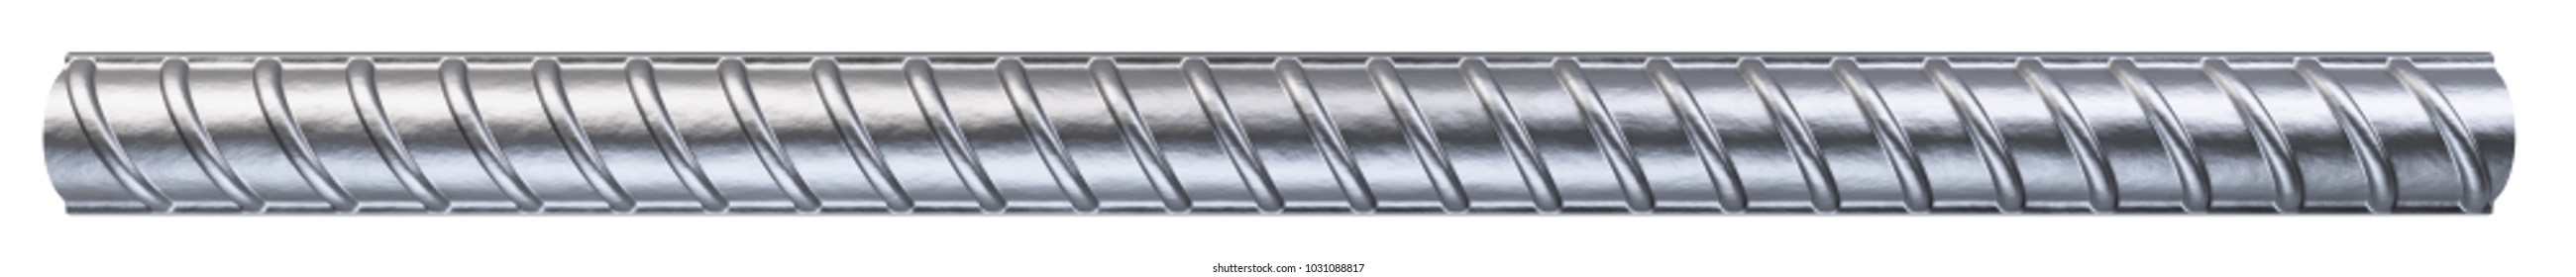 Reinforcement steel bar. Steel building armature. 3d illustration isolated on white background.